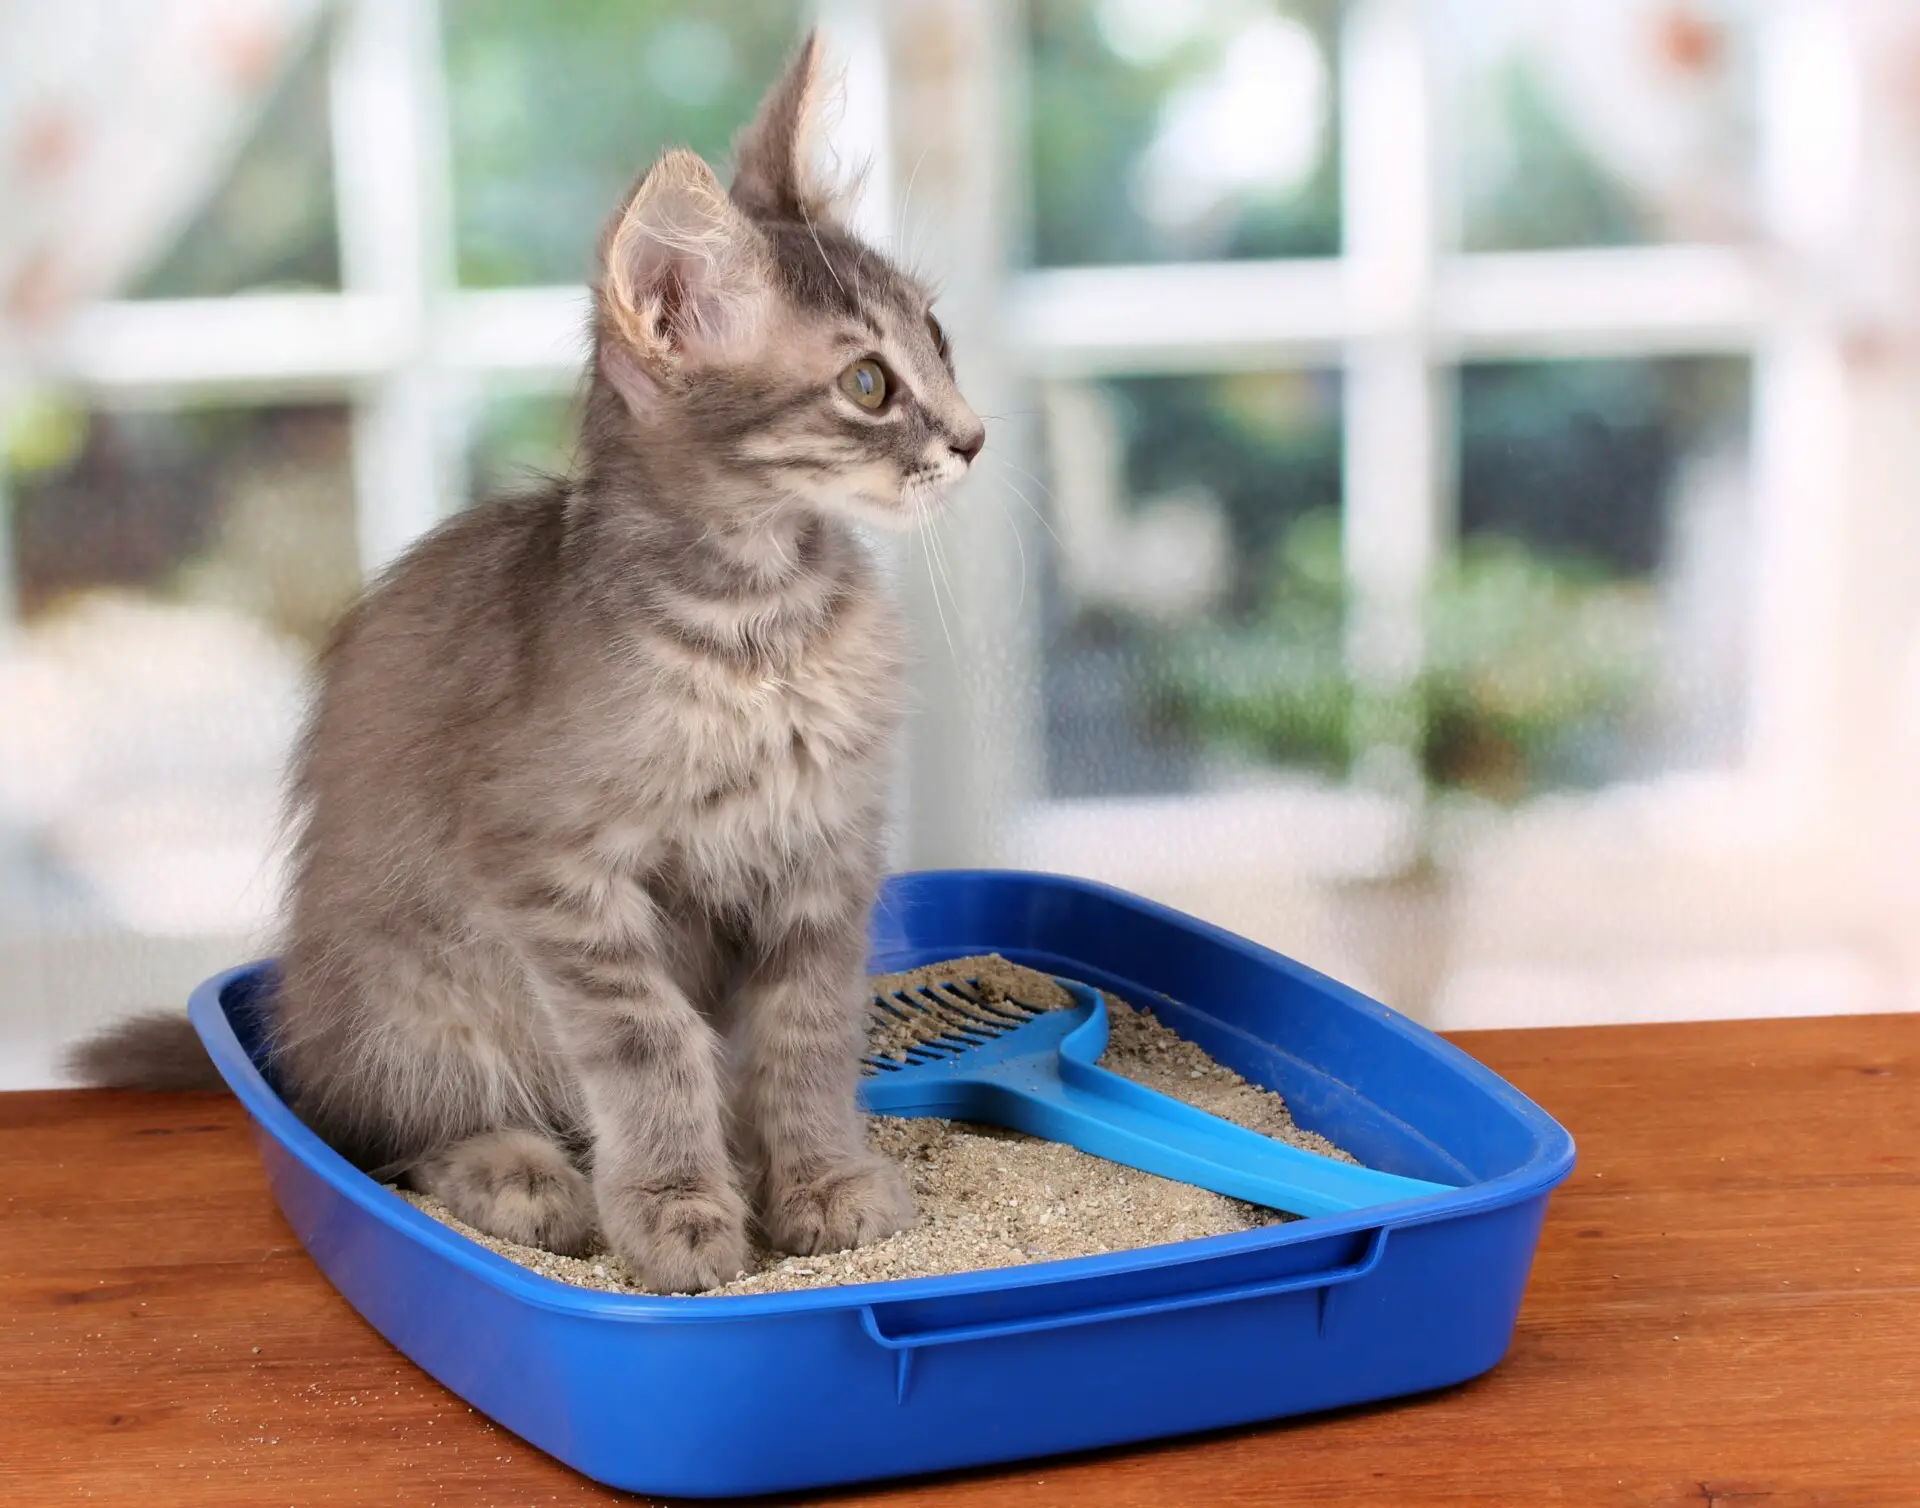 Is Cat Litter Bad for the Environment? (5 Common Questions)